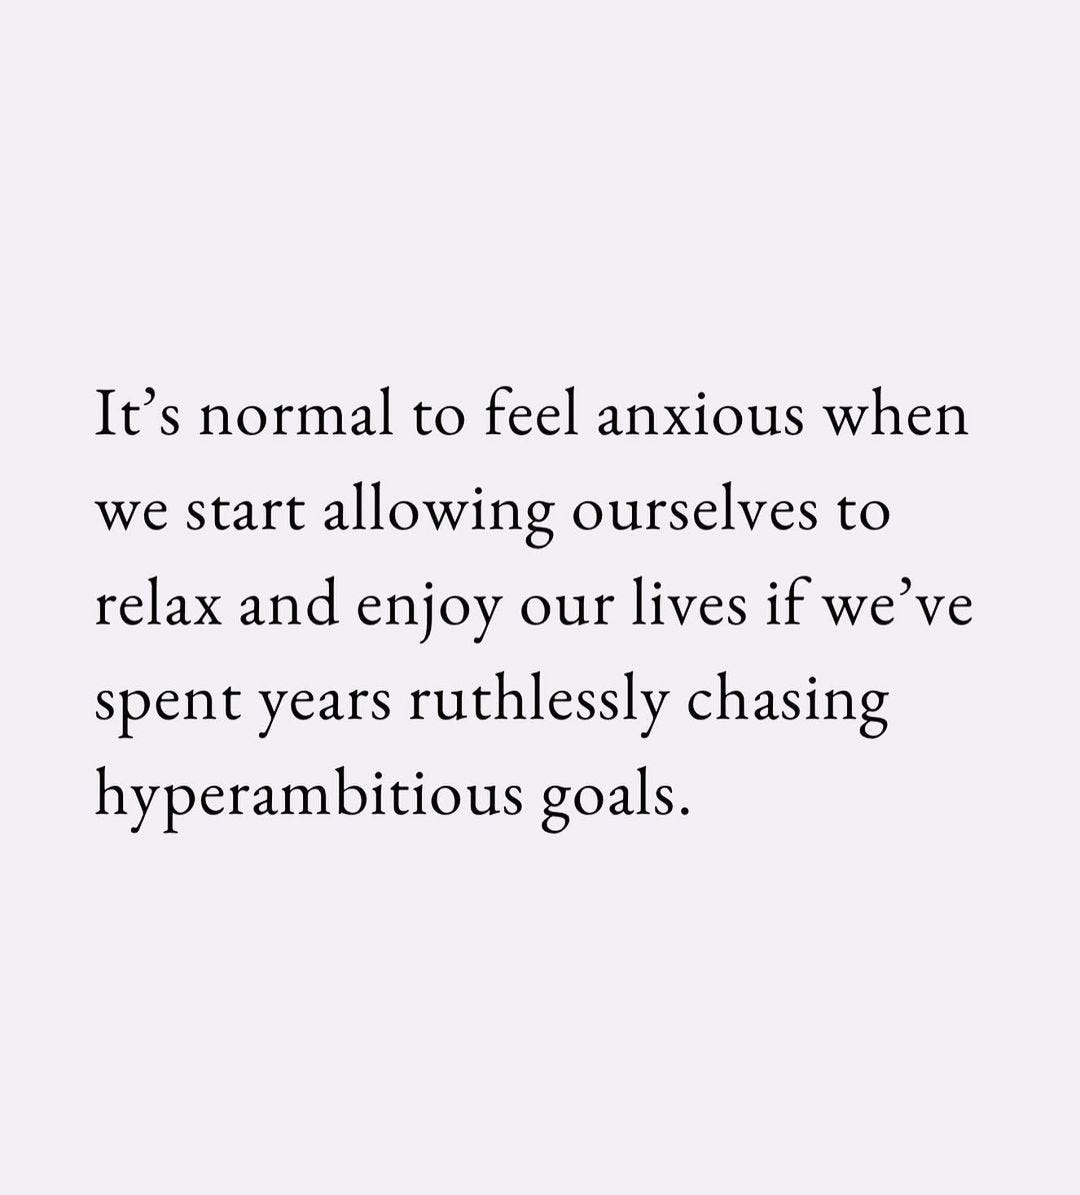 A black quote on a purple background that reads, "It's normal to feel anxious when we start allowing ourselves to relax and enjoy our lives if we've spent years ruthlessly chasing hyperambitious goals."